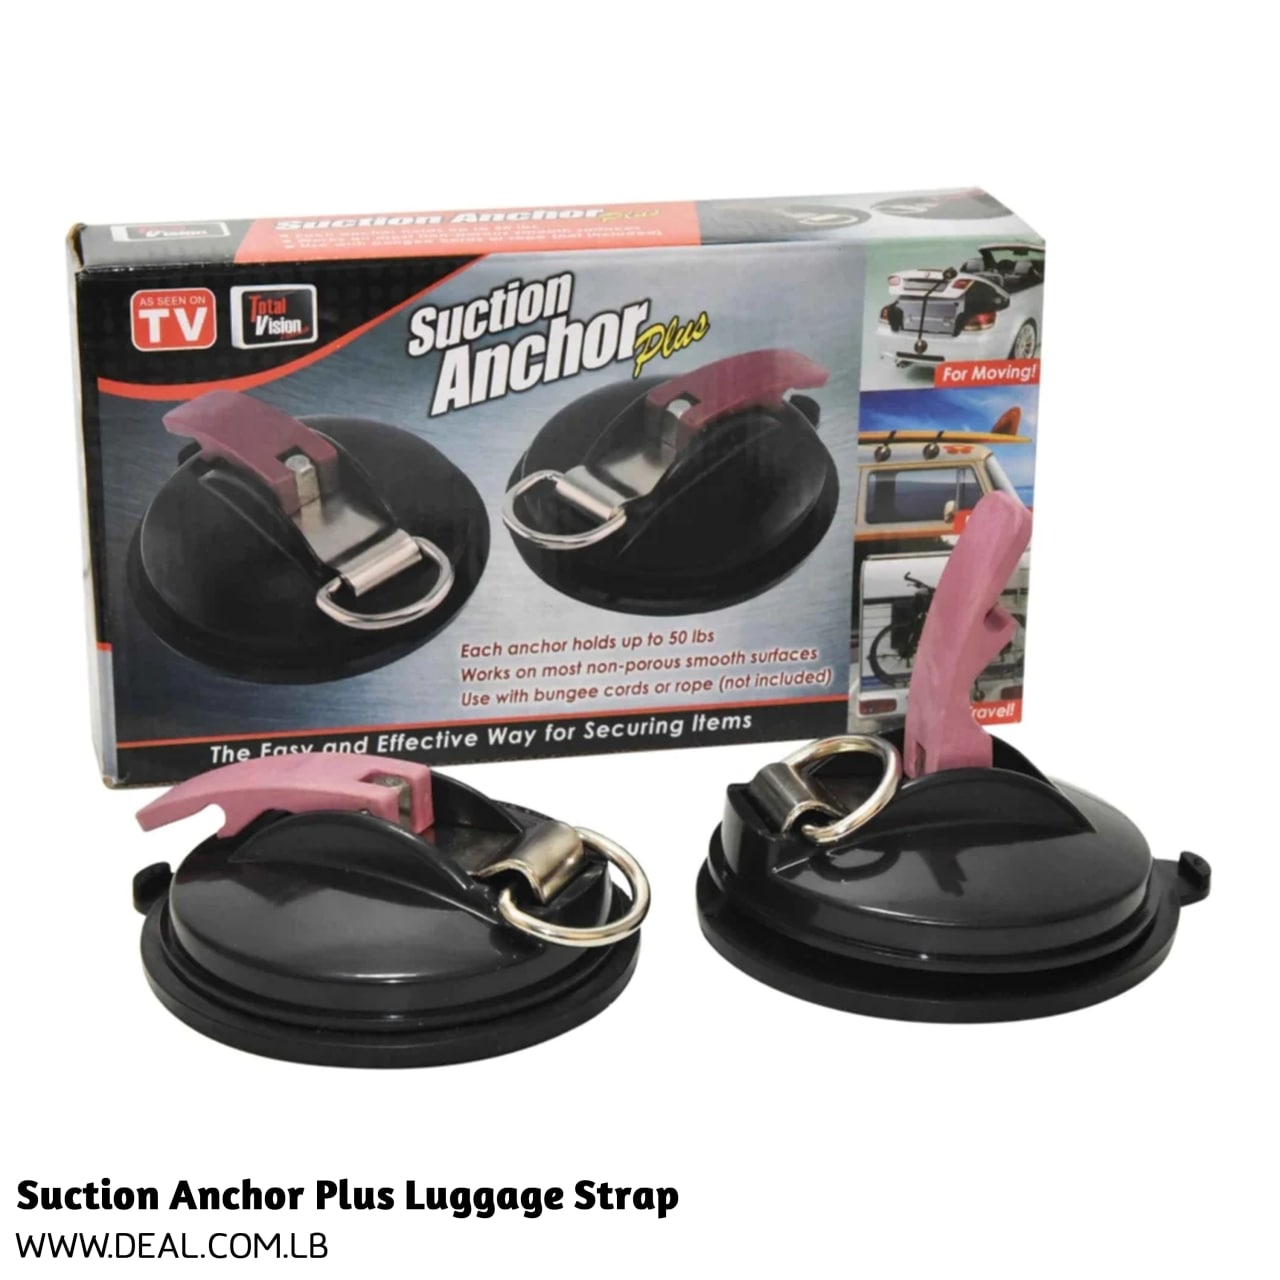 Suction Anchor Plus Luggage Strap